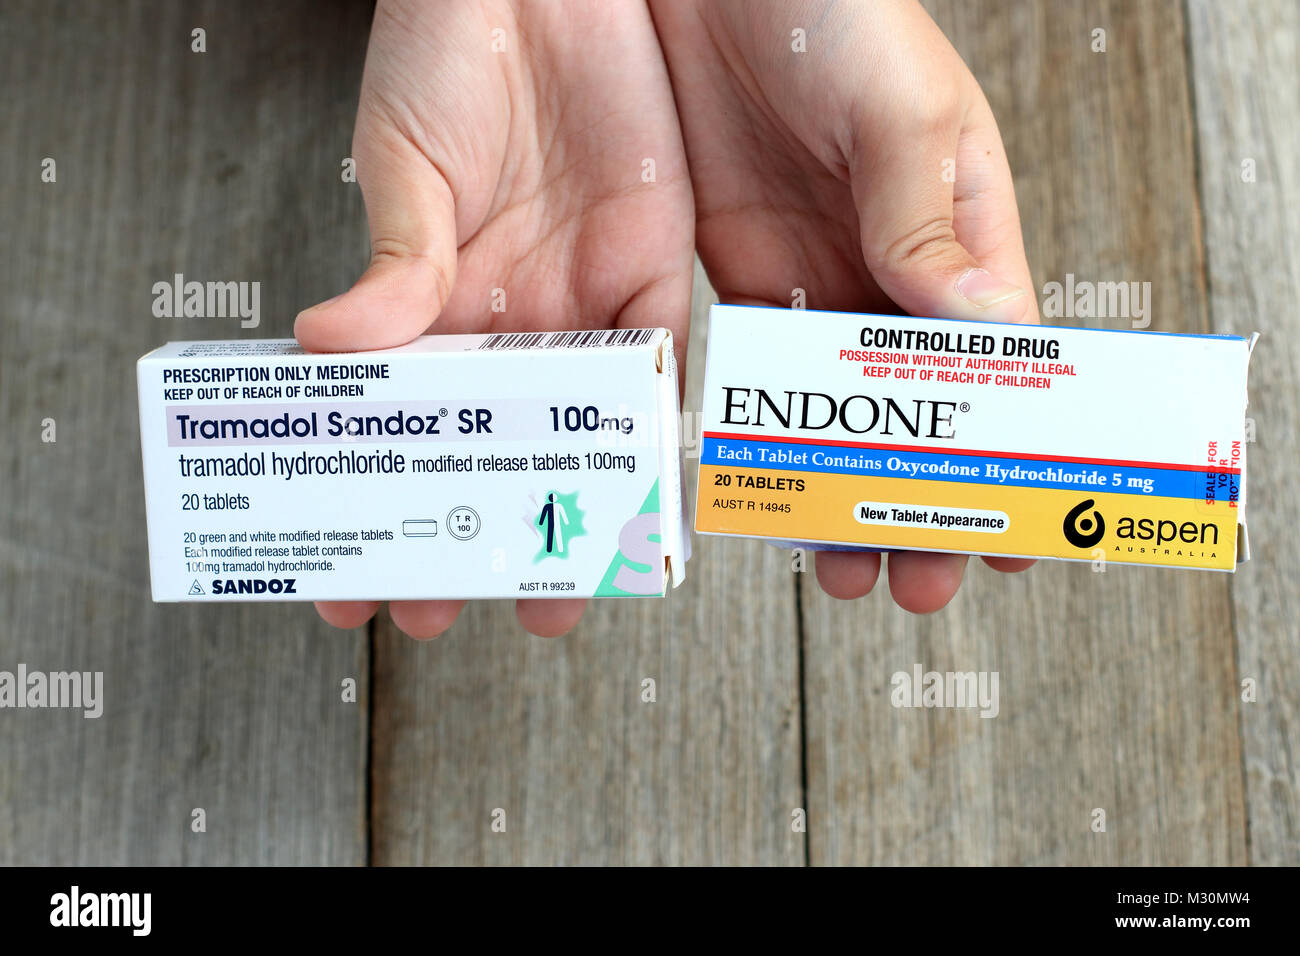 Tramadol a controlled australia in is drug